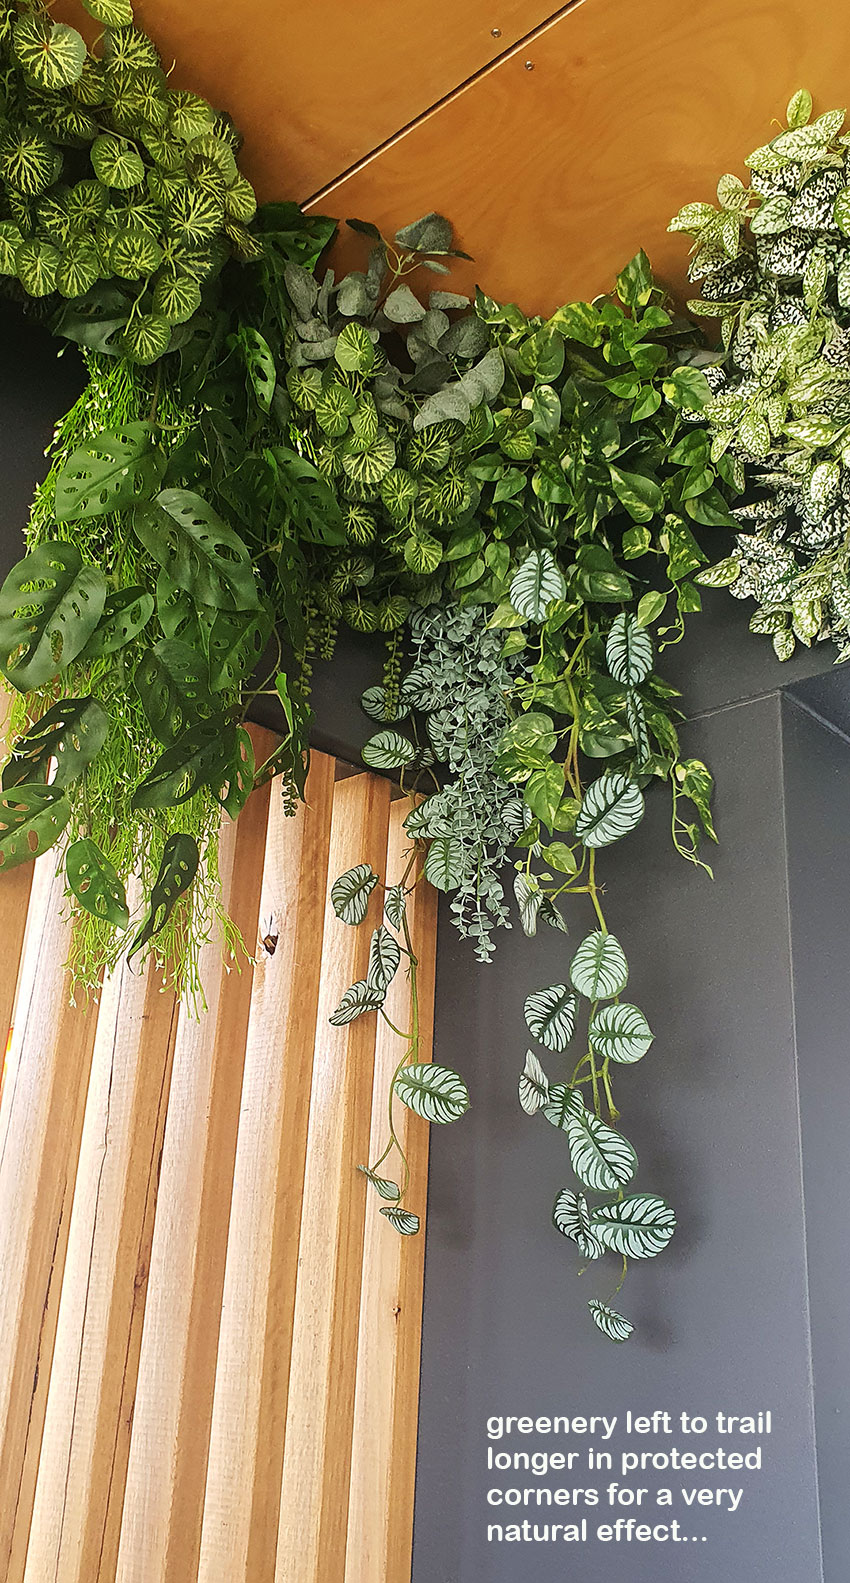 Very latest artificial greenery ideas used to lift Shopping Cnt Dining Precinct... image 10